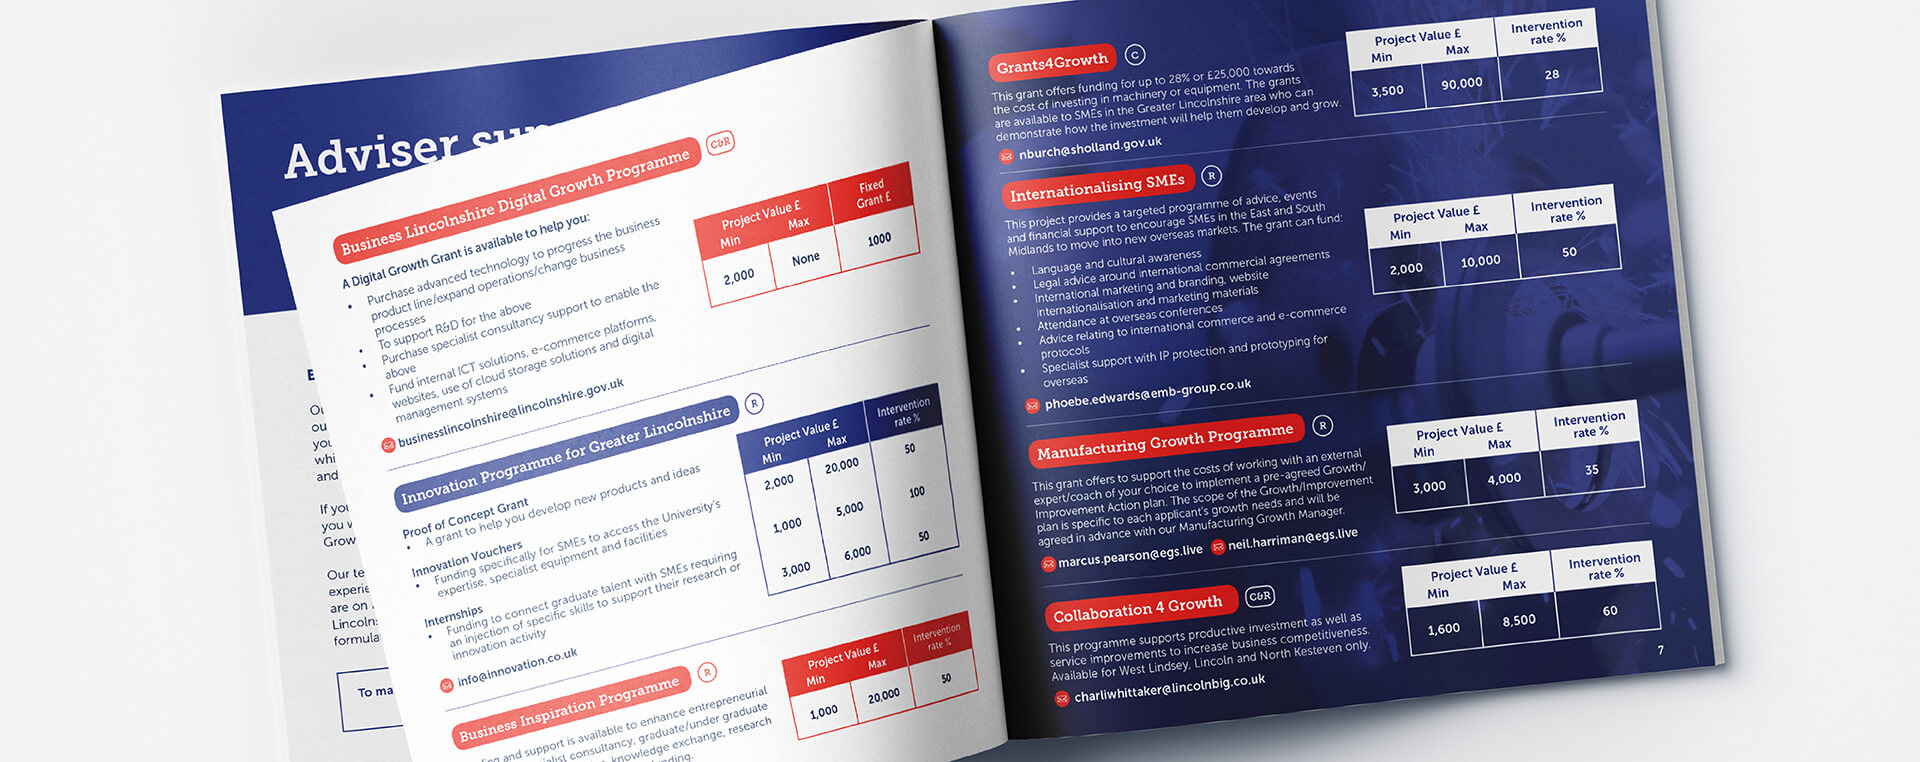 An opened business growth guide revealing pages detailing different growth support programmes.